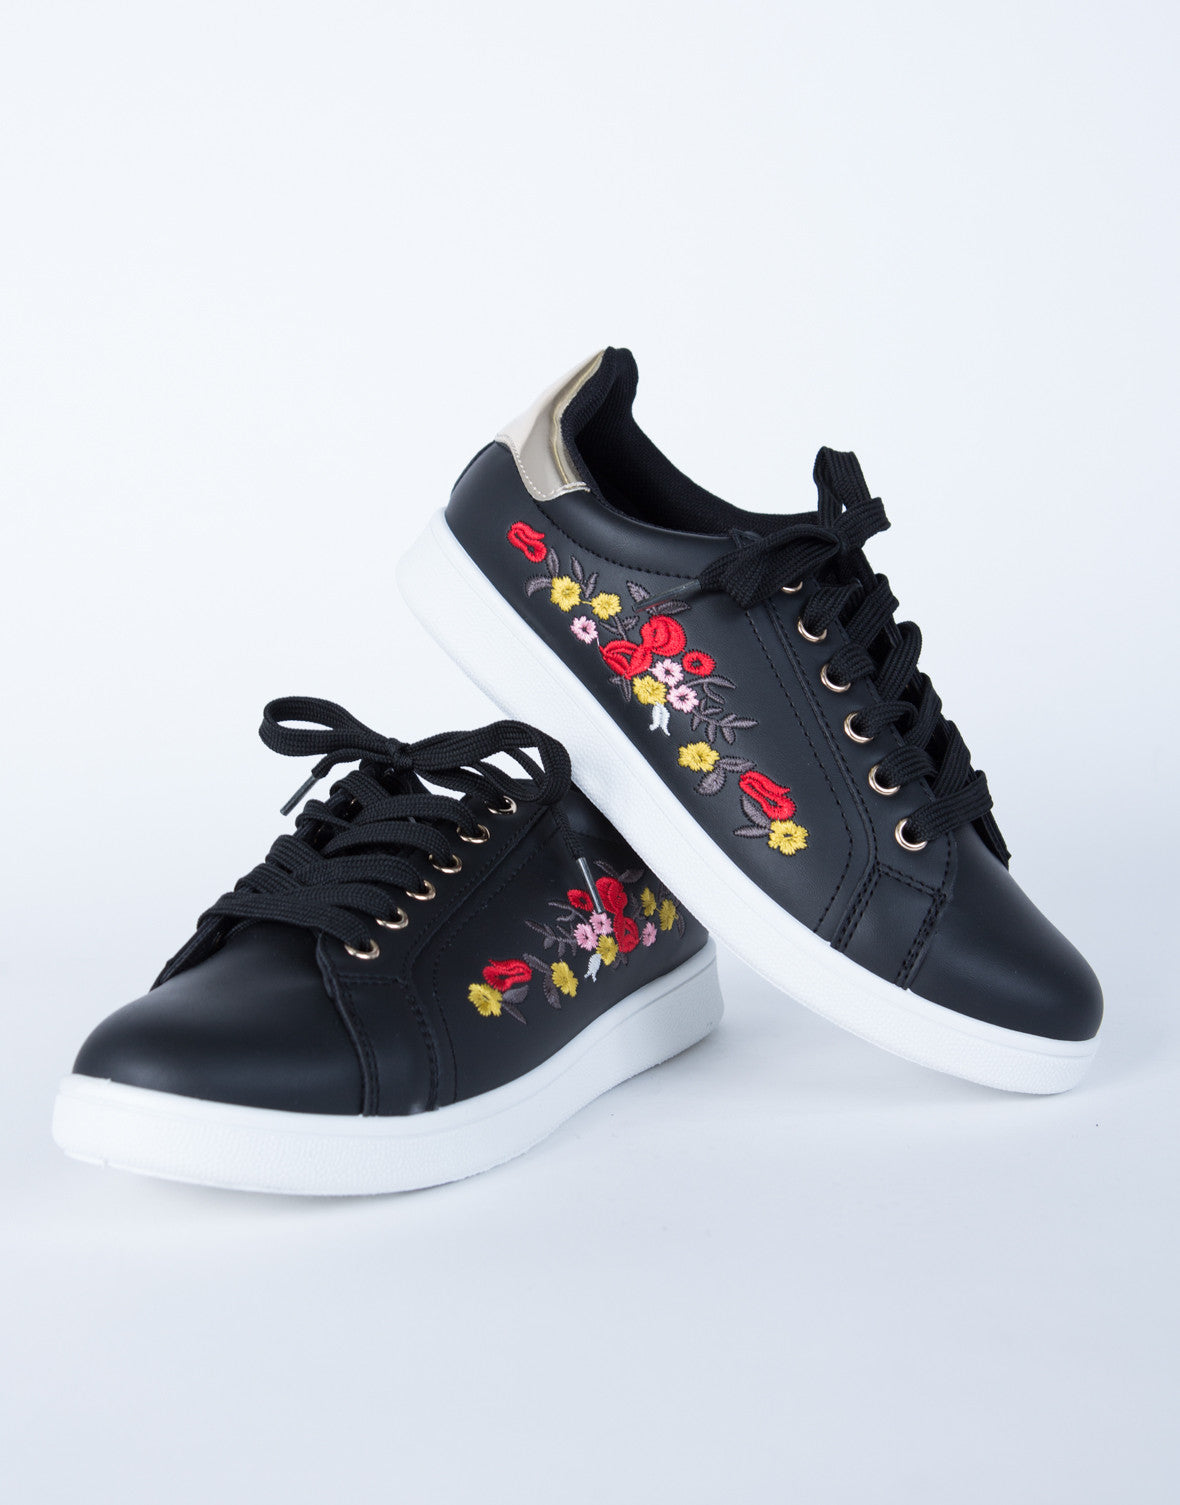 Floral Embroidered Sneakers - Black 